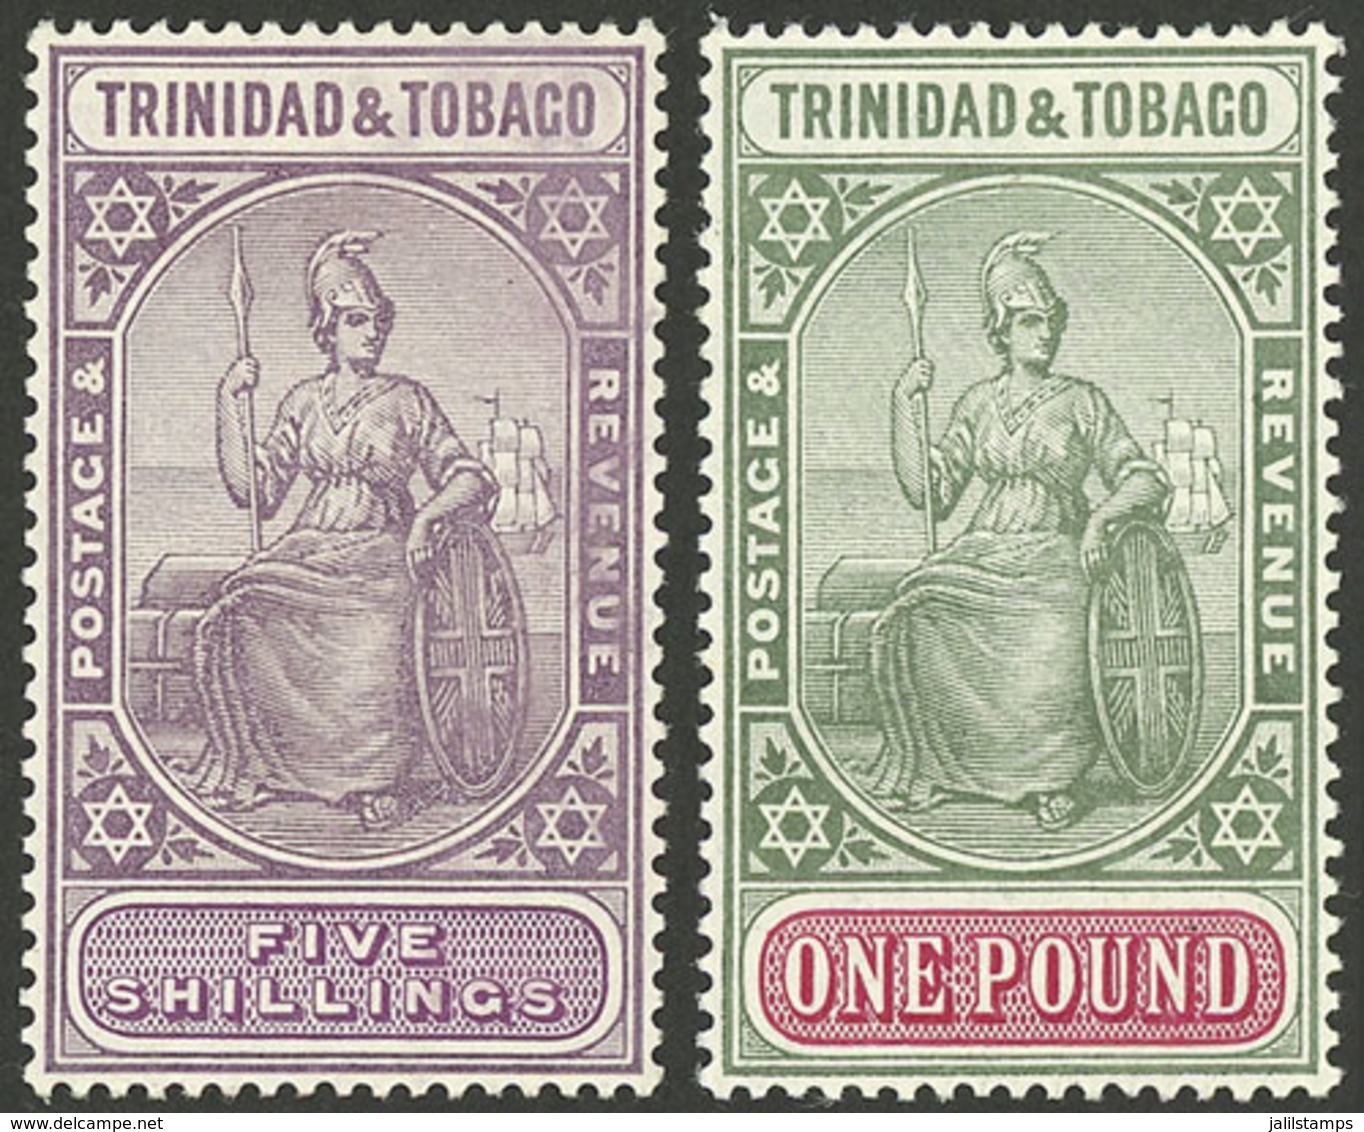 TRINIDAD AND TOBAGO: Sc.19/20, 1921/2 High Values Of The Set, Mint Very Lightly Hinged, Excellent Quality! - Trindad & Tobago (...-1961)